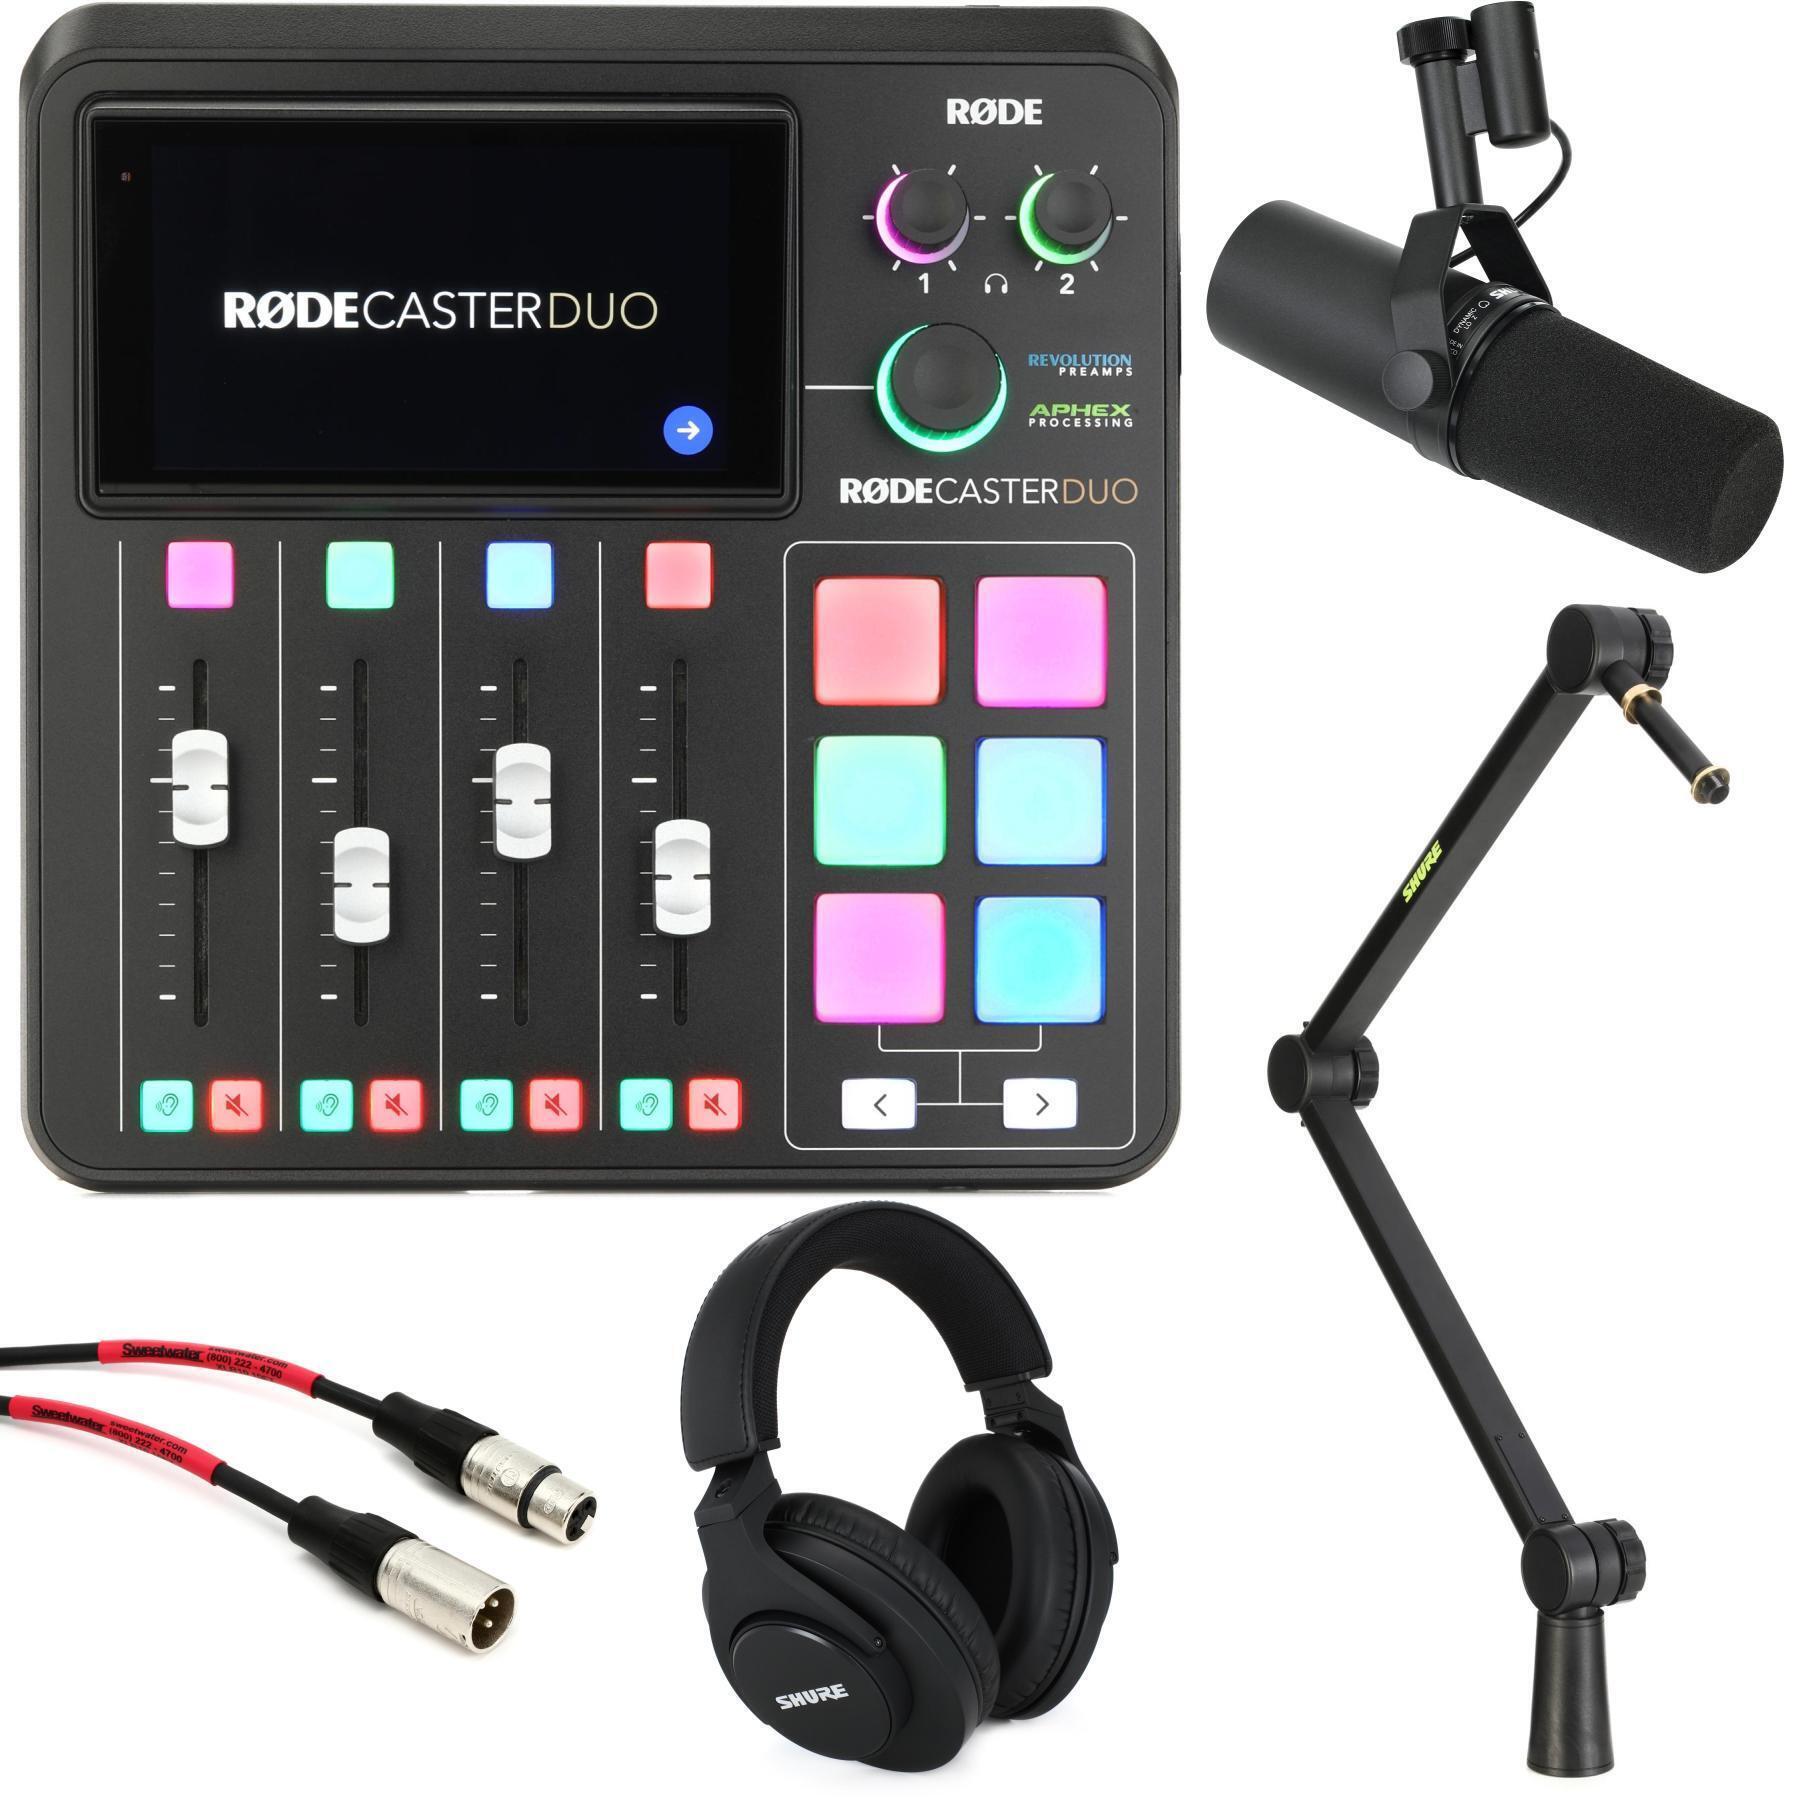 Podcasting Equipment and Packages  Shop Our Podcast Bundles, Kits,  Microphones, Headphones, Mixers, Interfaces, Acoustic Panels, Mic Booms,  Device Mounts and Accessories